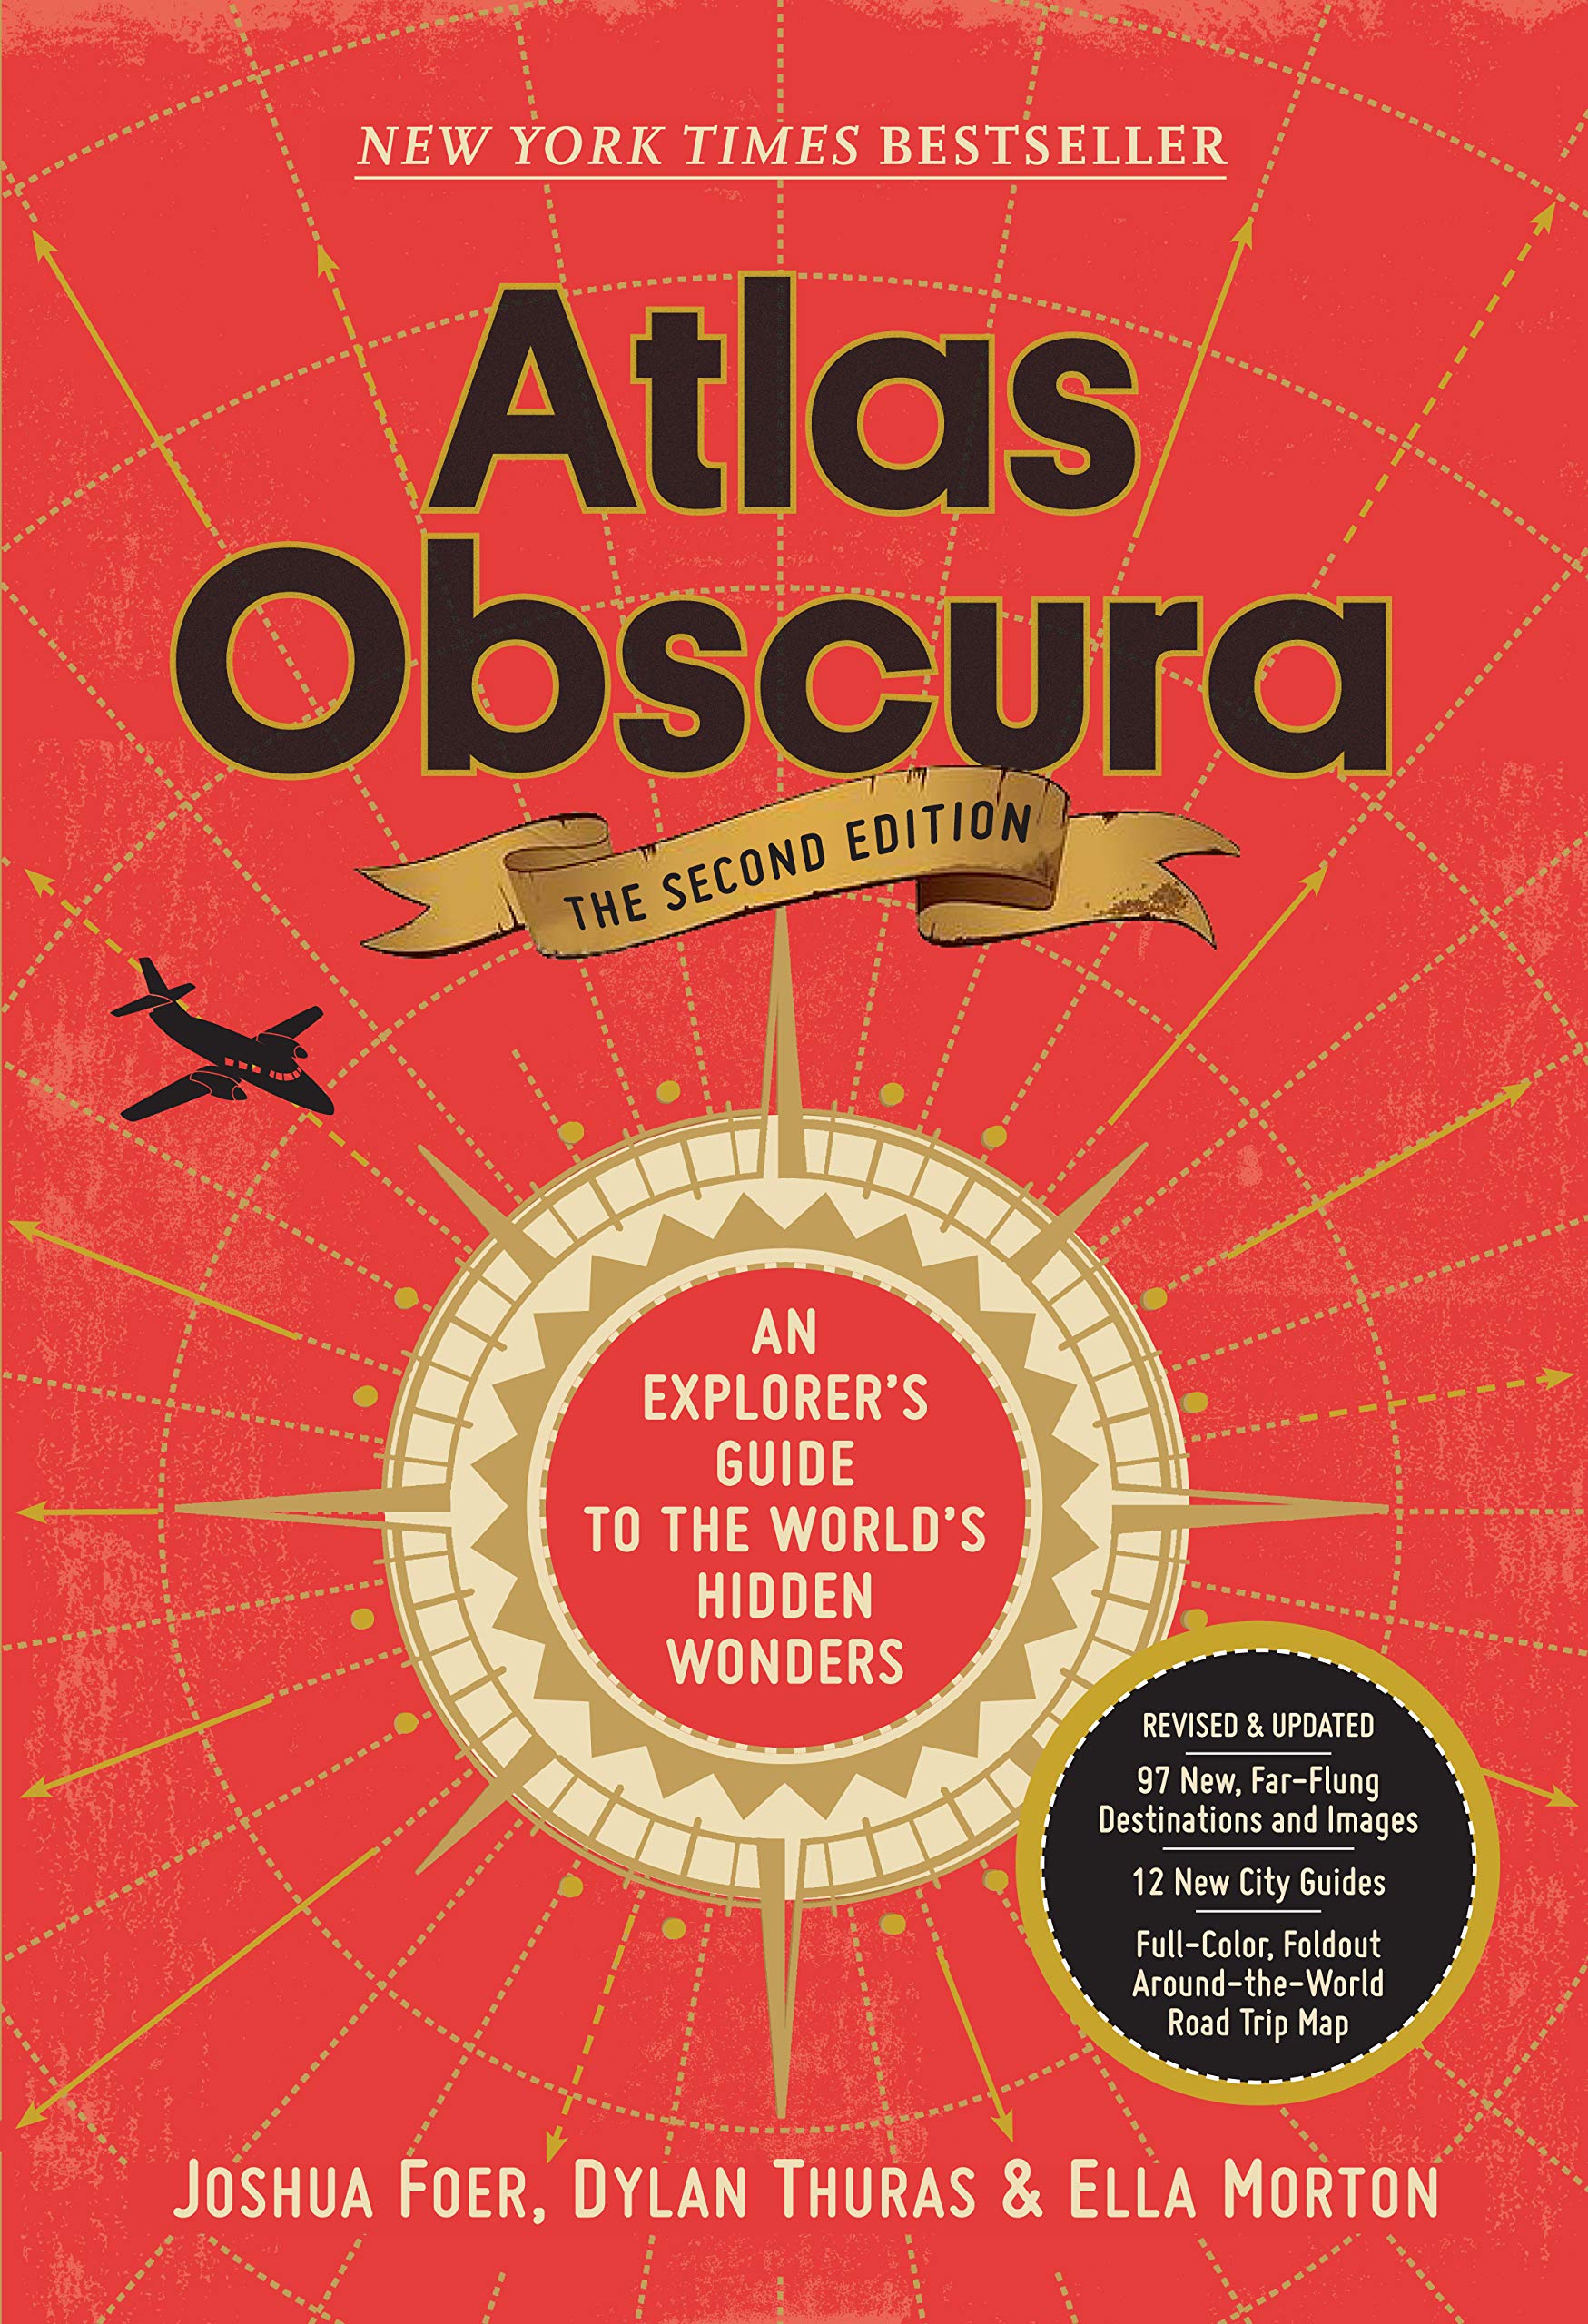 Image for "Atlas Obscura"